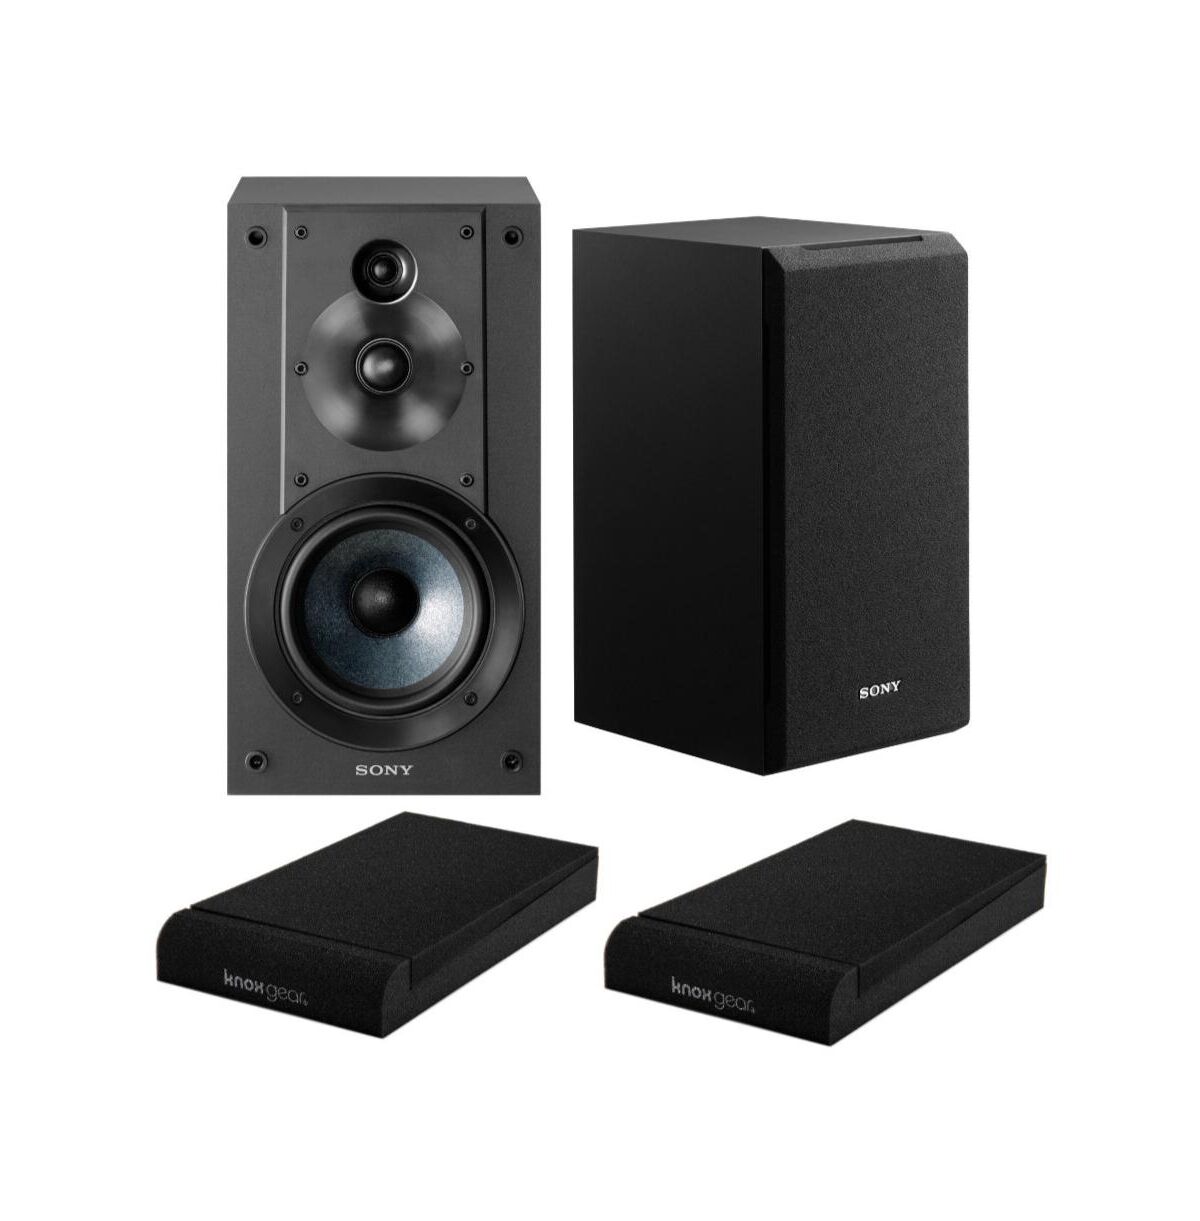 Sony SSCS5 3-Way 3-Driver Bookshelf Speaker System (Black) with Isolation Pads - Black